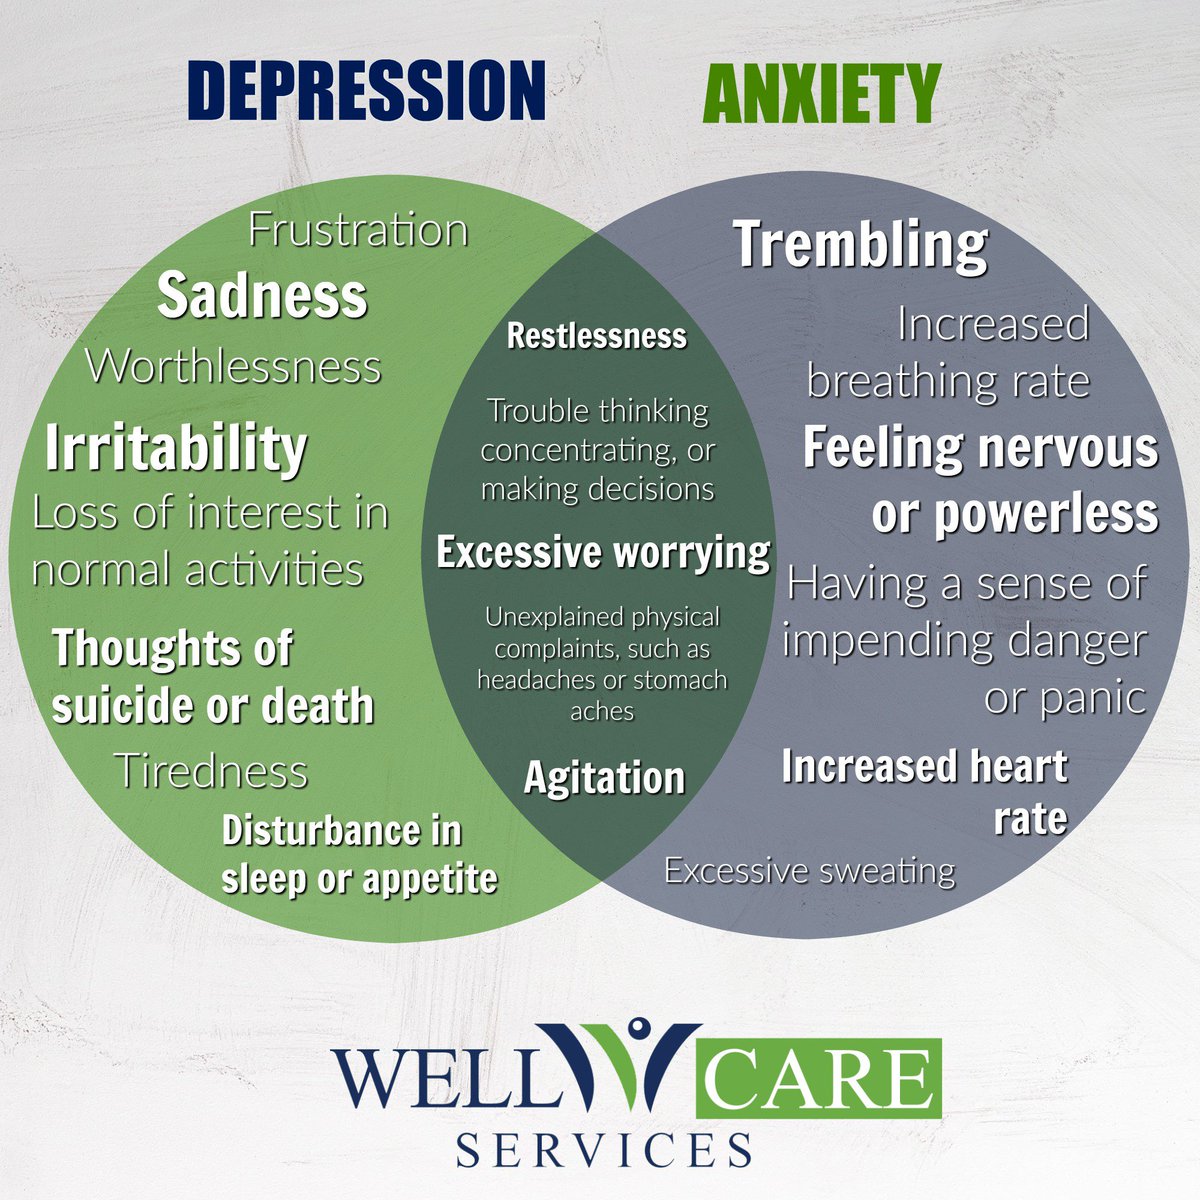 What Is Anxiety Vs Depression